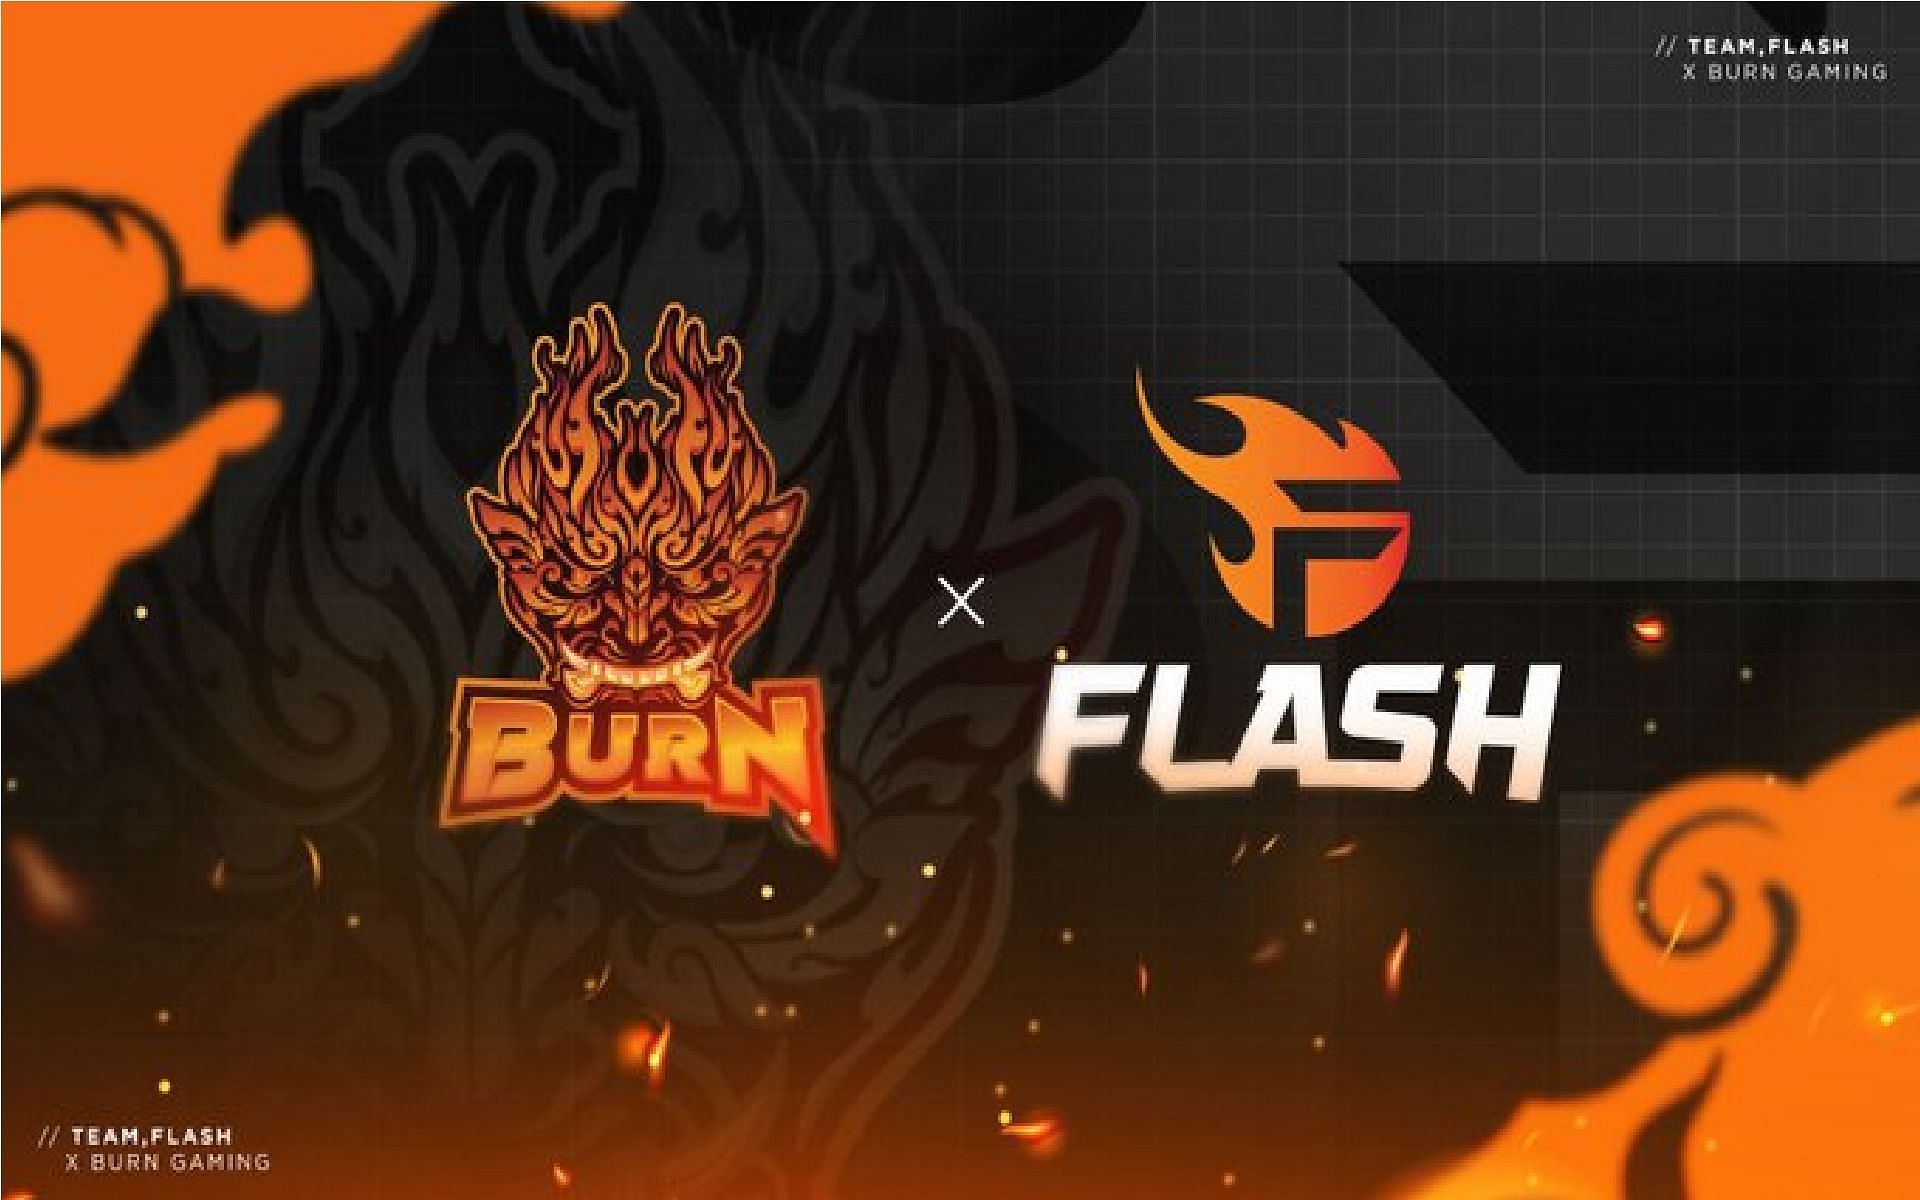 Burn x Flash can pull off an upset in the third game of Playoffs Round 1 (Image via Burn x Flash)